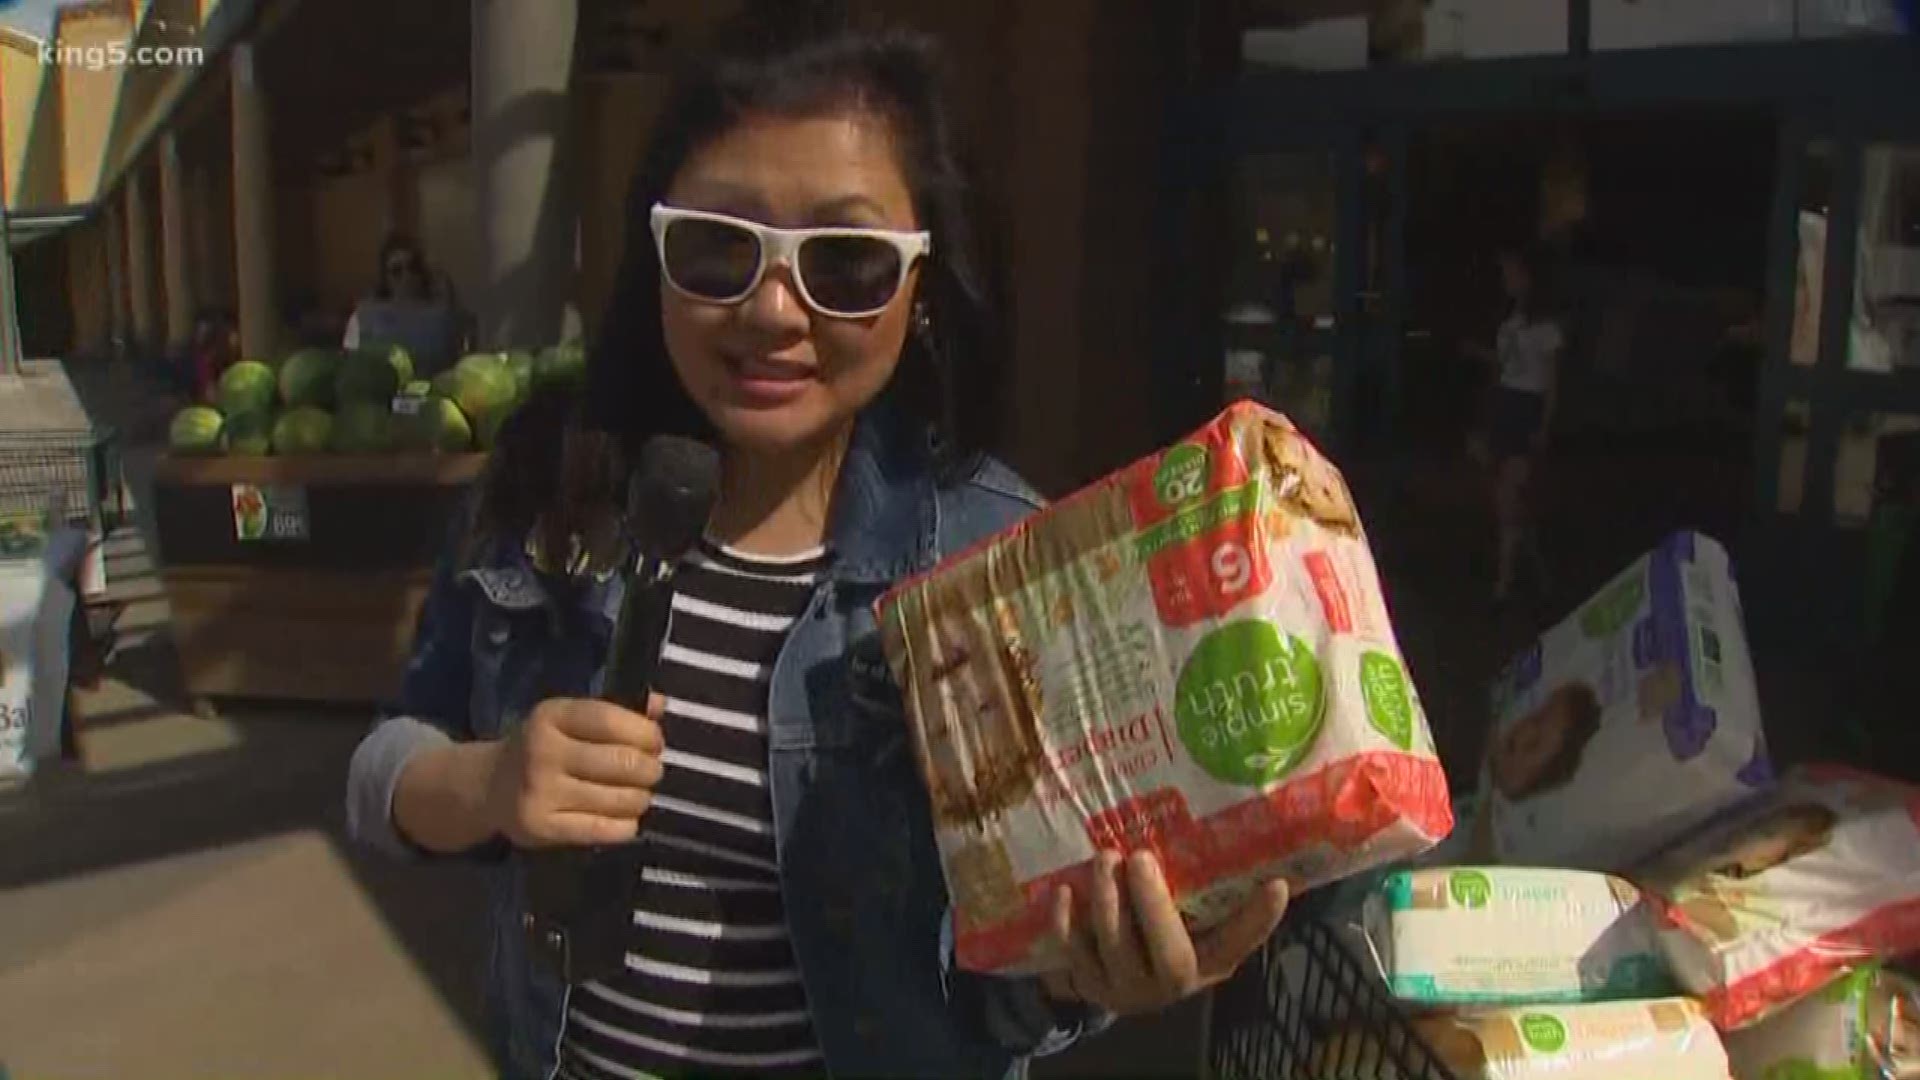 Did you know in King County 23% of families struggle to afford diapers? KING 5's Take 5's Michelle Li is out at the QFC in U Village to help Westside Baby collect diapers.